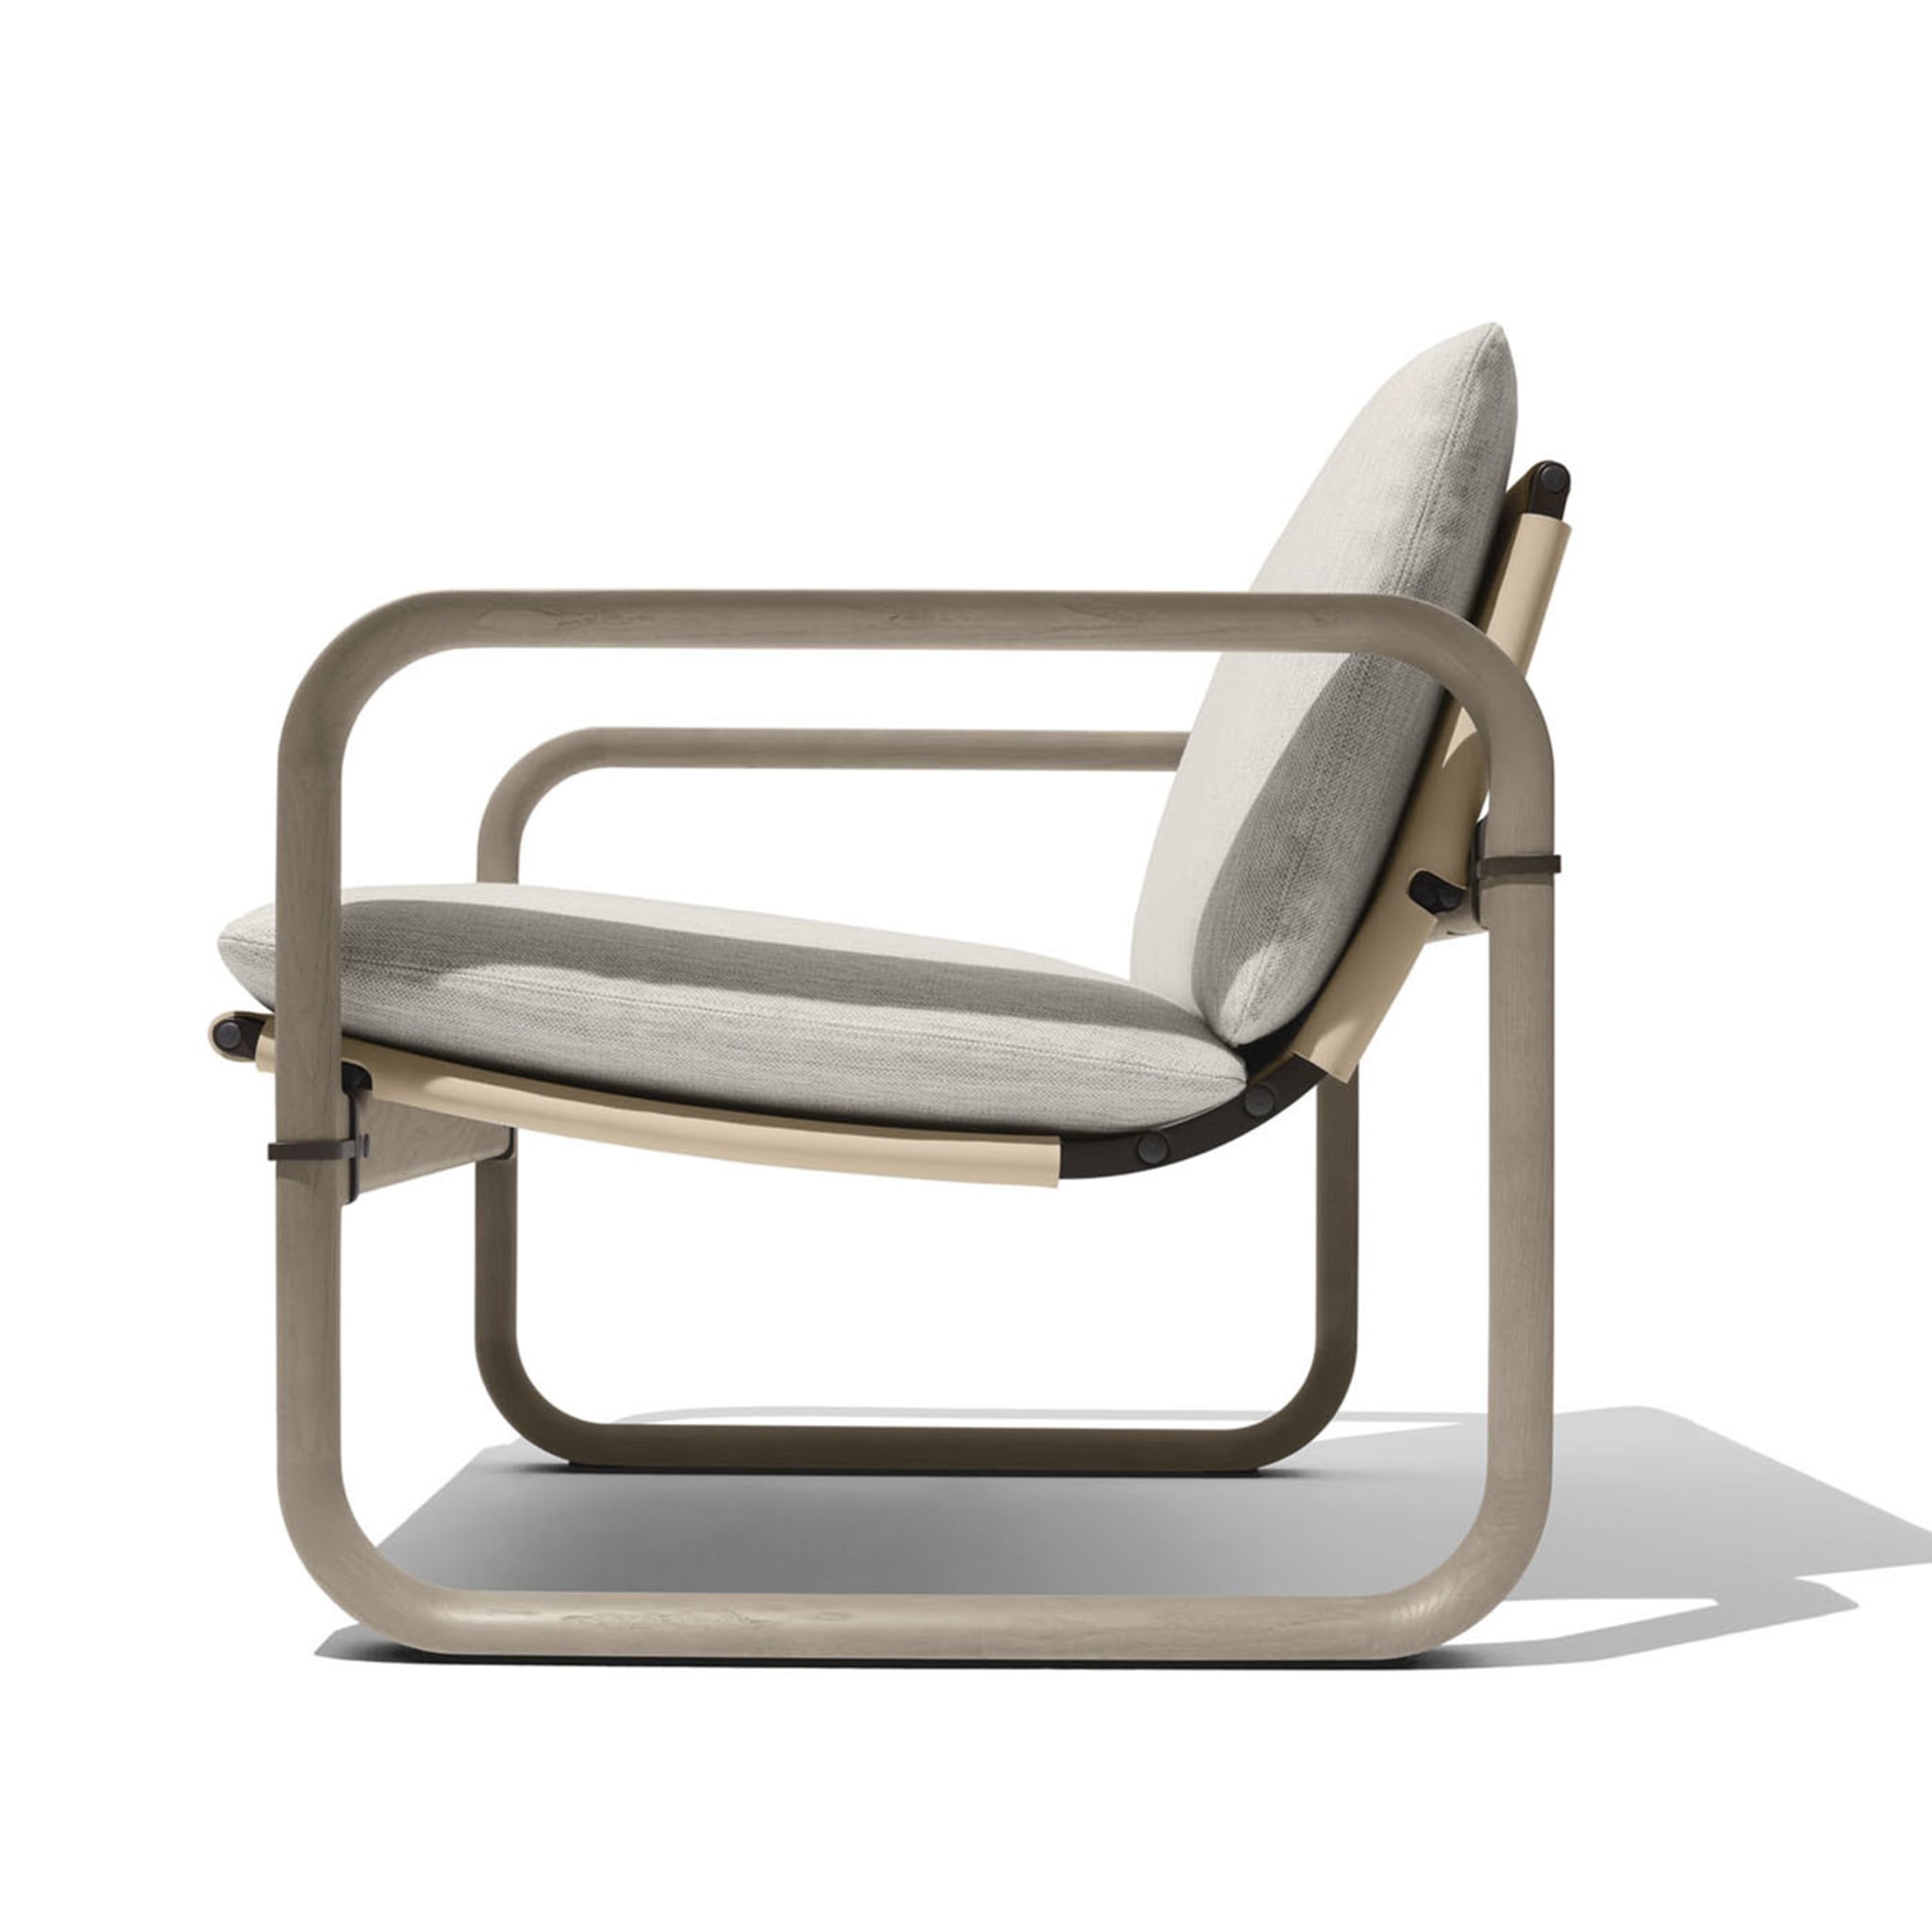 Loop Outdoor Lounge Chiar by Ludovica+Roberto Palomba - Alternative view 1